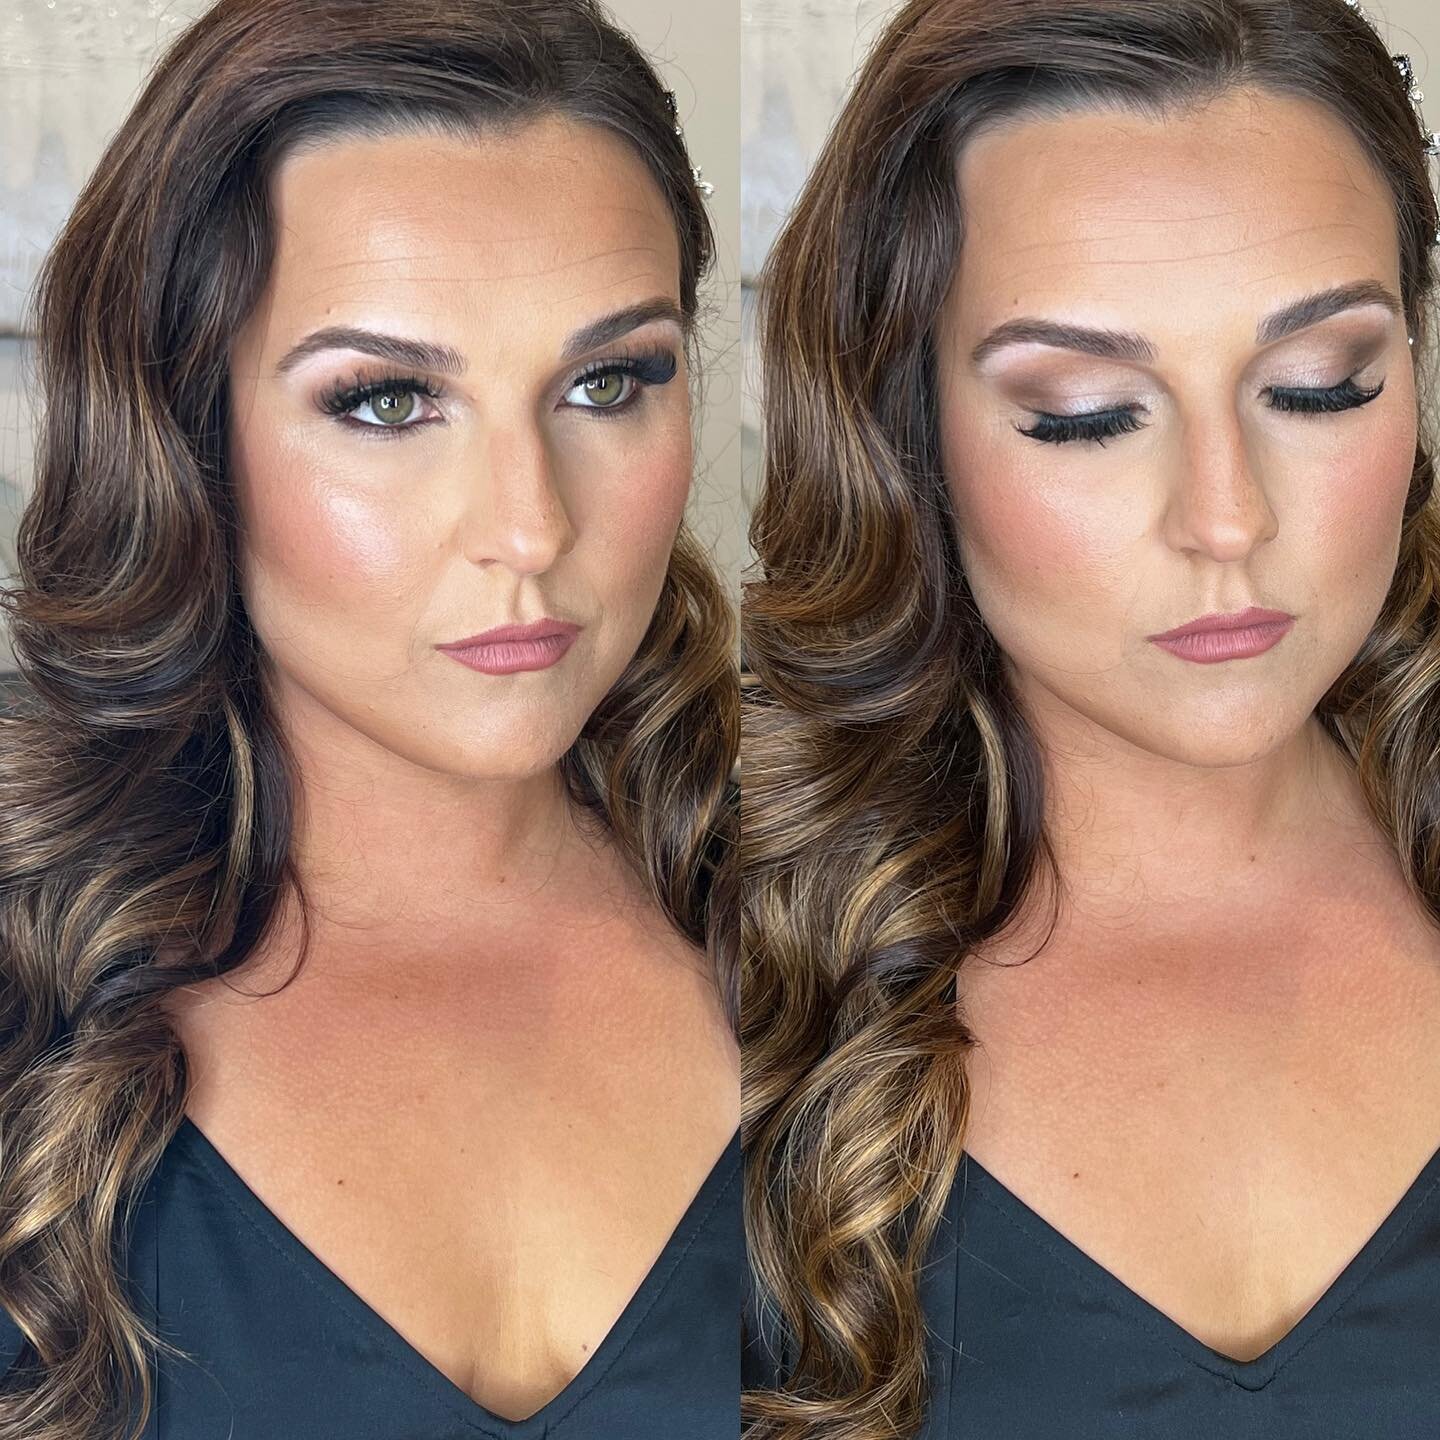 My bride Lindsay was just jaw drop stunning! 

Makeup by Stephanie 
Hair by @hairbywhitneyc 

#parlourbeaute #wnybride #buffalolove #buffalobride #wnymua #wnymakeupartist #buffalomakeupartist #wnysalon #buffalosalon #nofilter #noedit